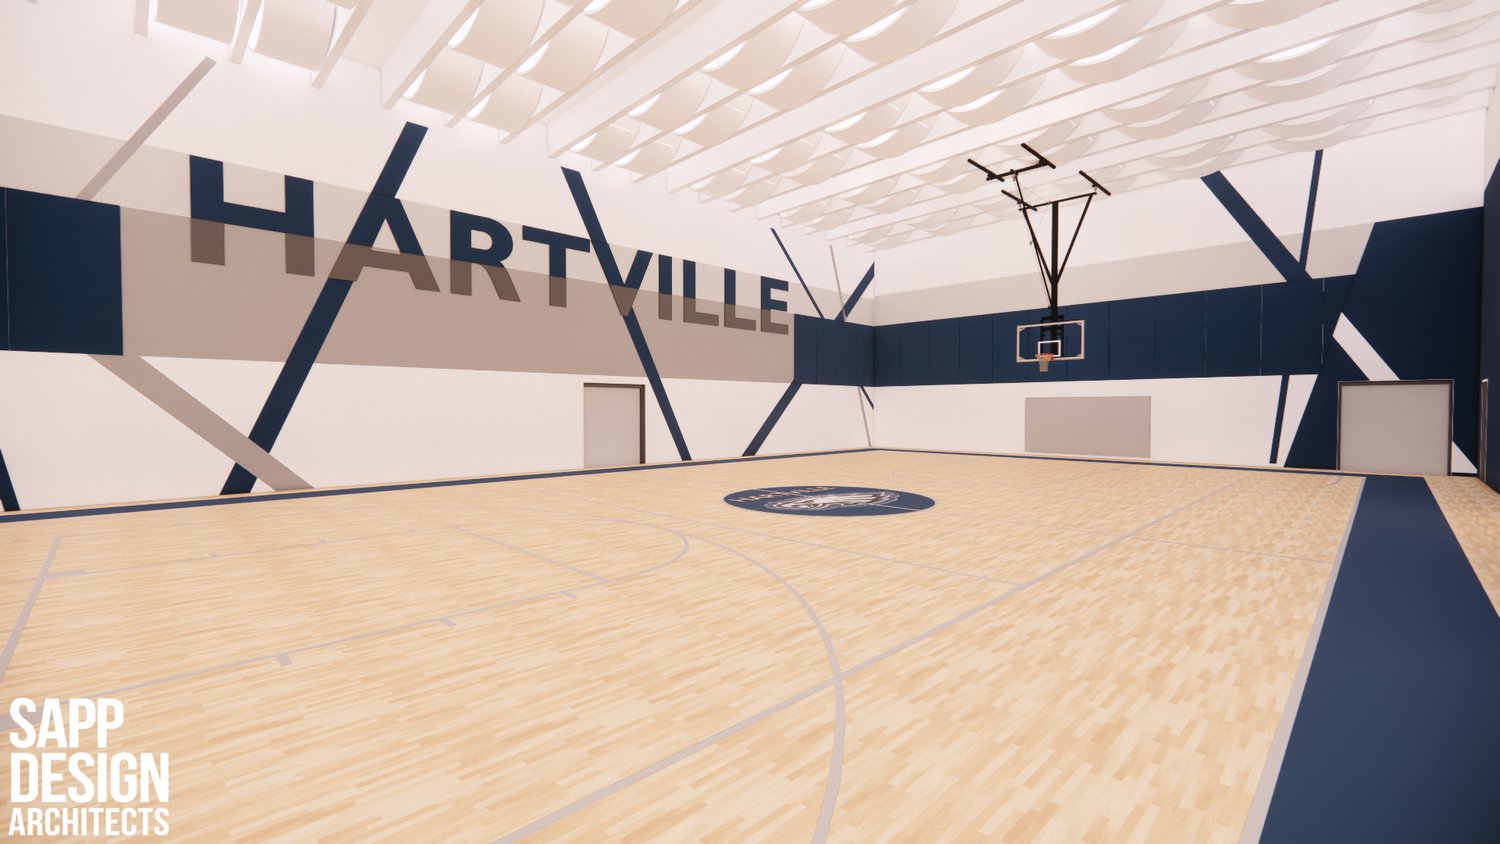 An FEMA interior rendering shows a vision for a new basketball court being utilized in the facility.